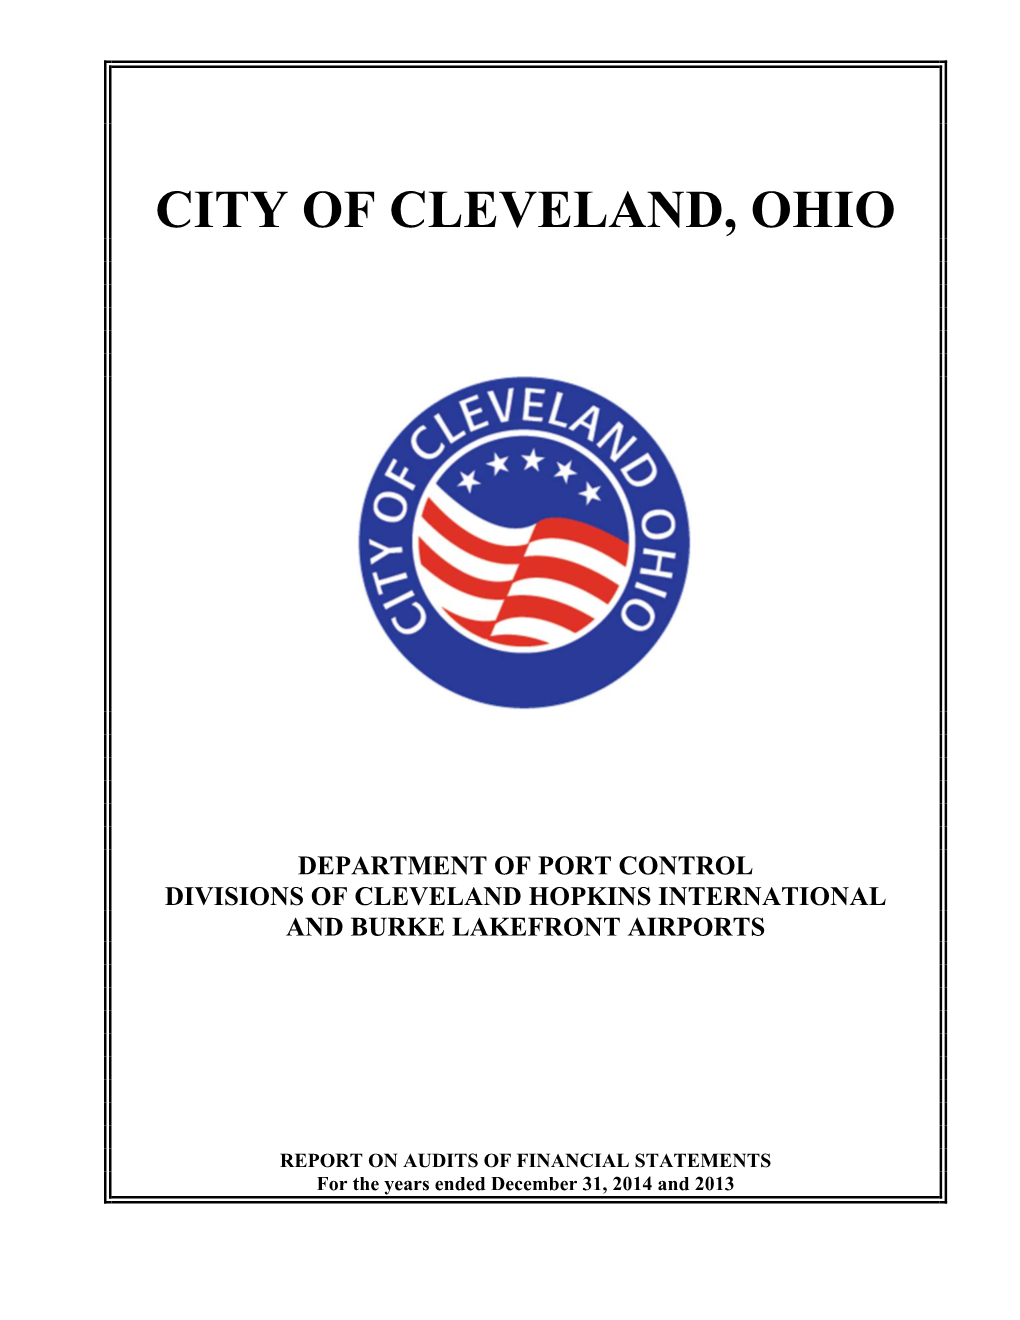 Department of Port Control Divisions of Cleveland Hopkins International and Burke Lakefront Airports